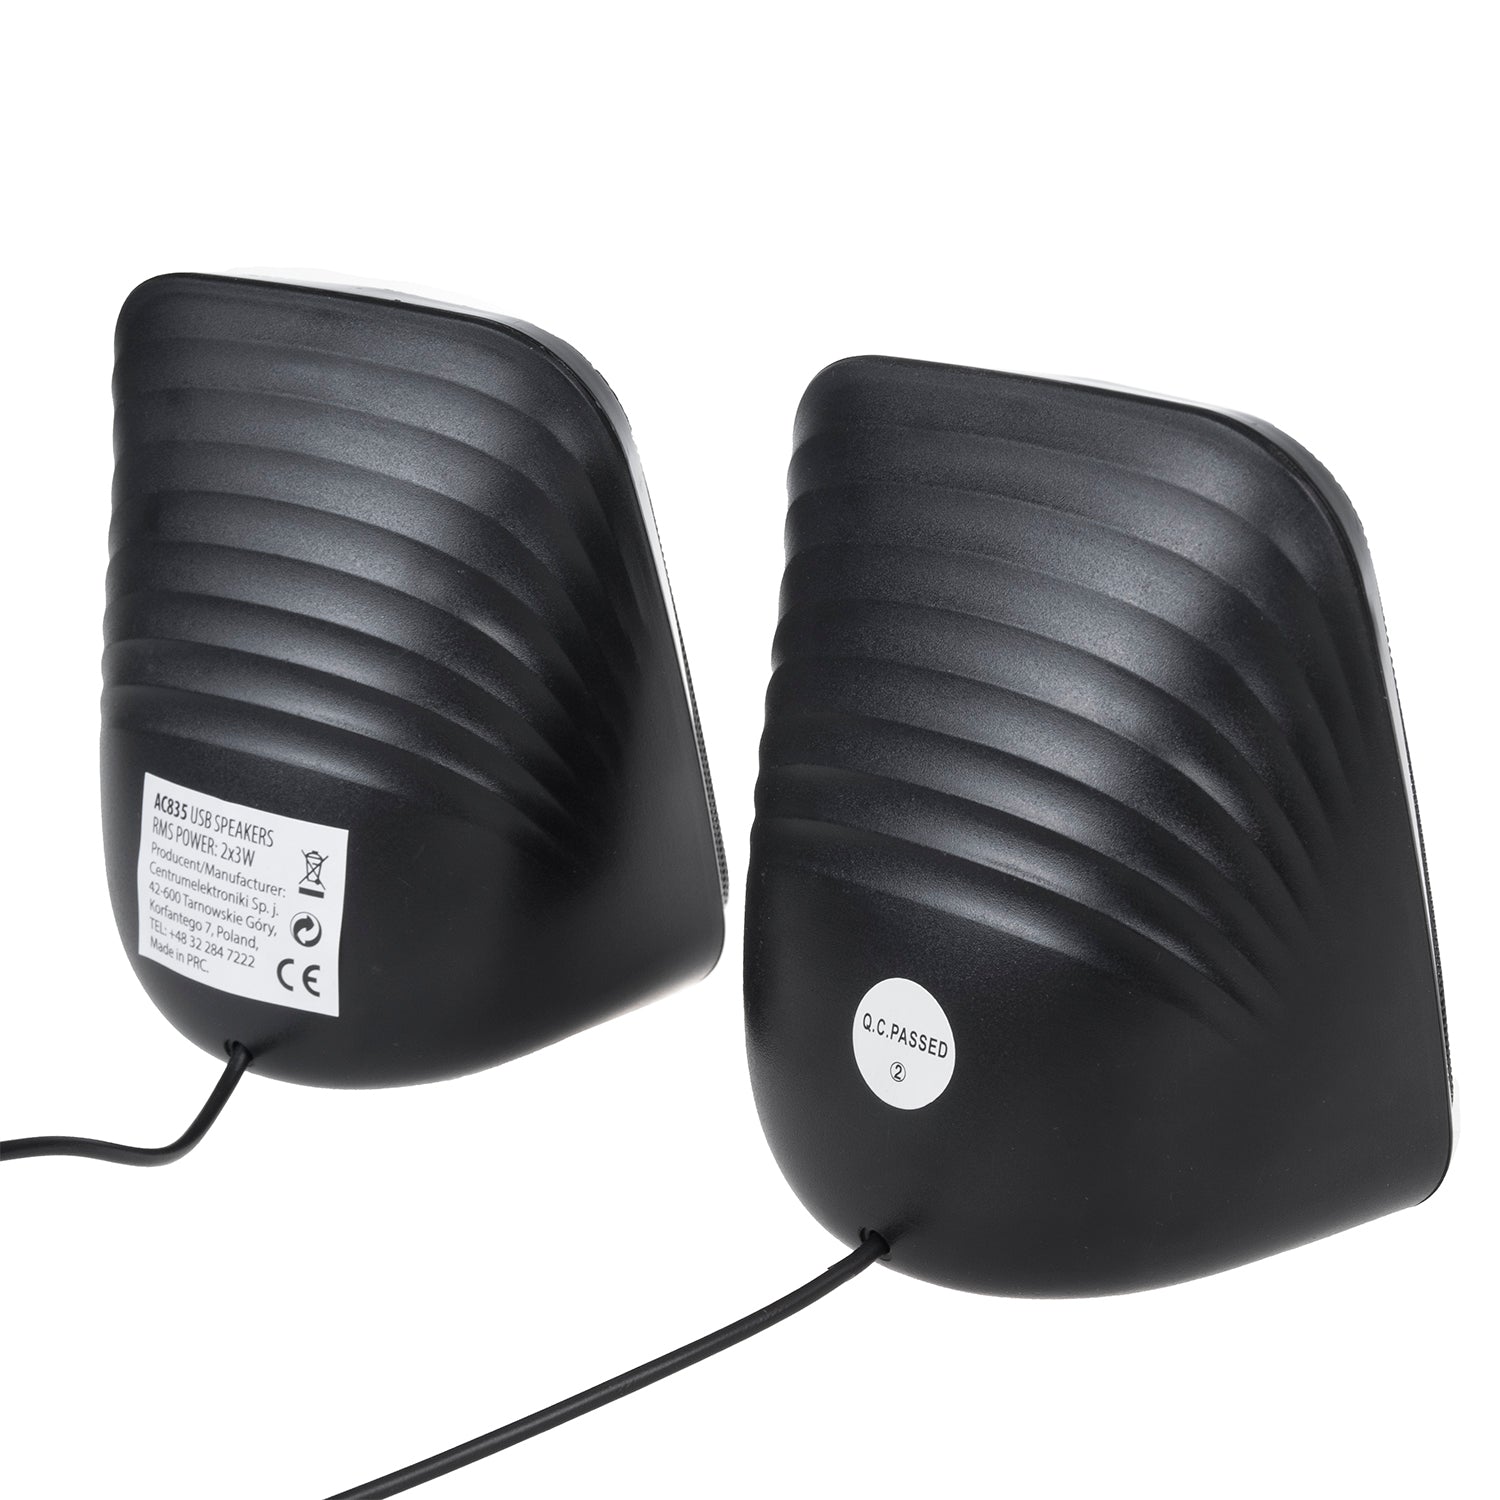 Audiocore Ac5 2 0 Stereo Speakers With Led Backlighting For Pc Lapto Euroelectronics Eu